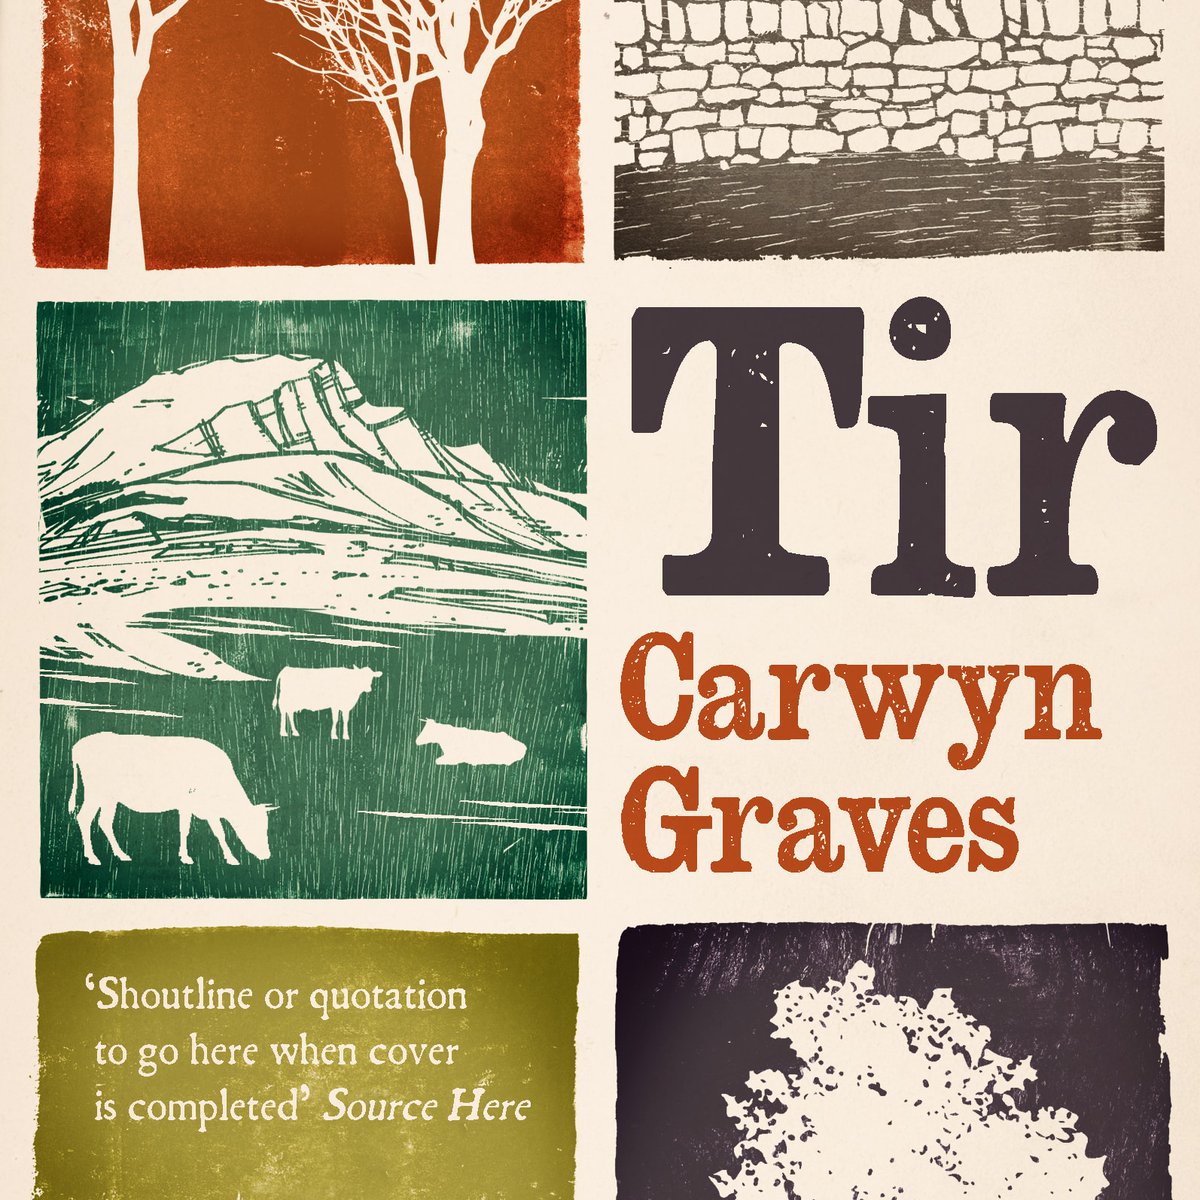 'This absorbing and constantly illuminating book is about many things, as its author asserts: it is about #farming and conservation, literature and #ecology, #nature and #culture.' Diolch i @JonGower1 // Generous review of #Tir in @NationCymru 👇 nation.cymru/culture/book-r…